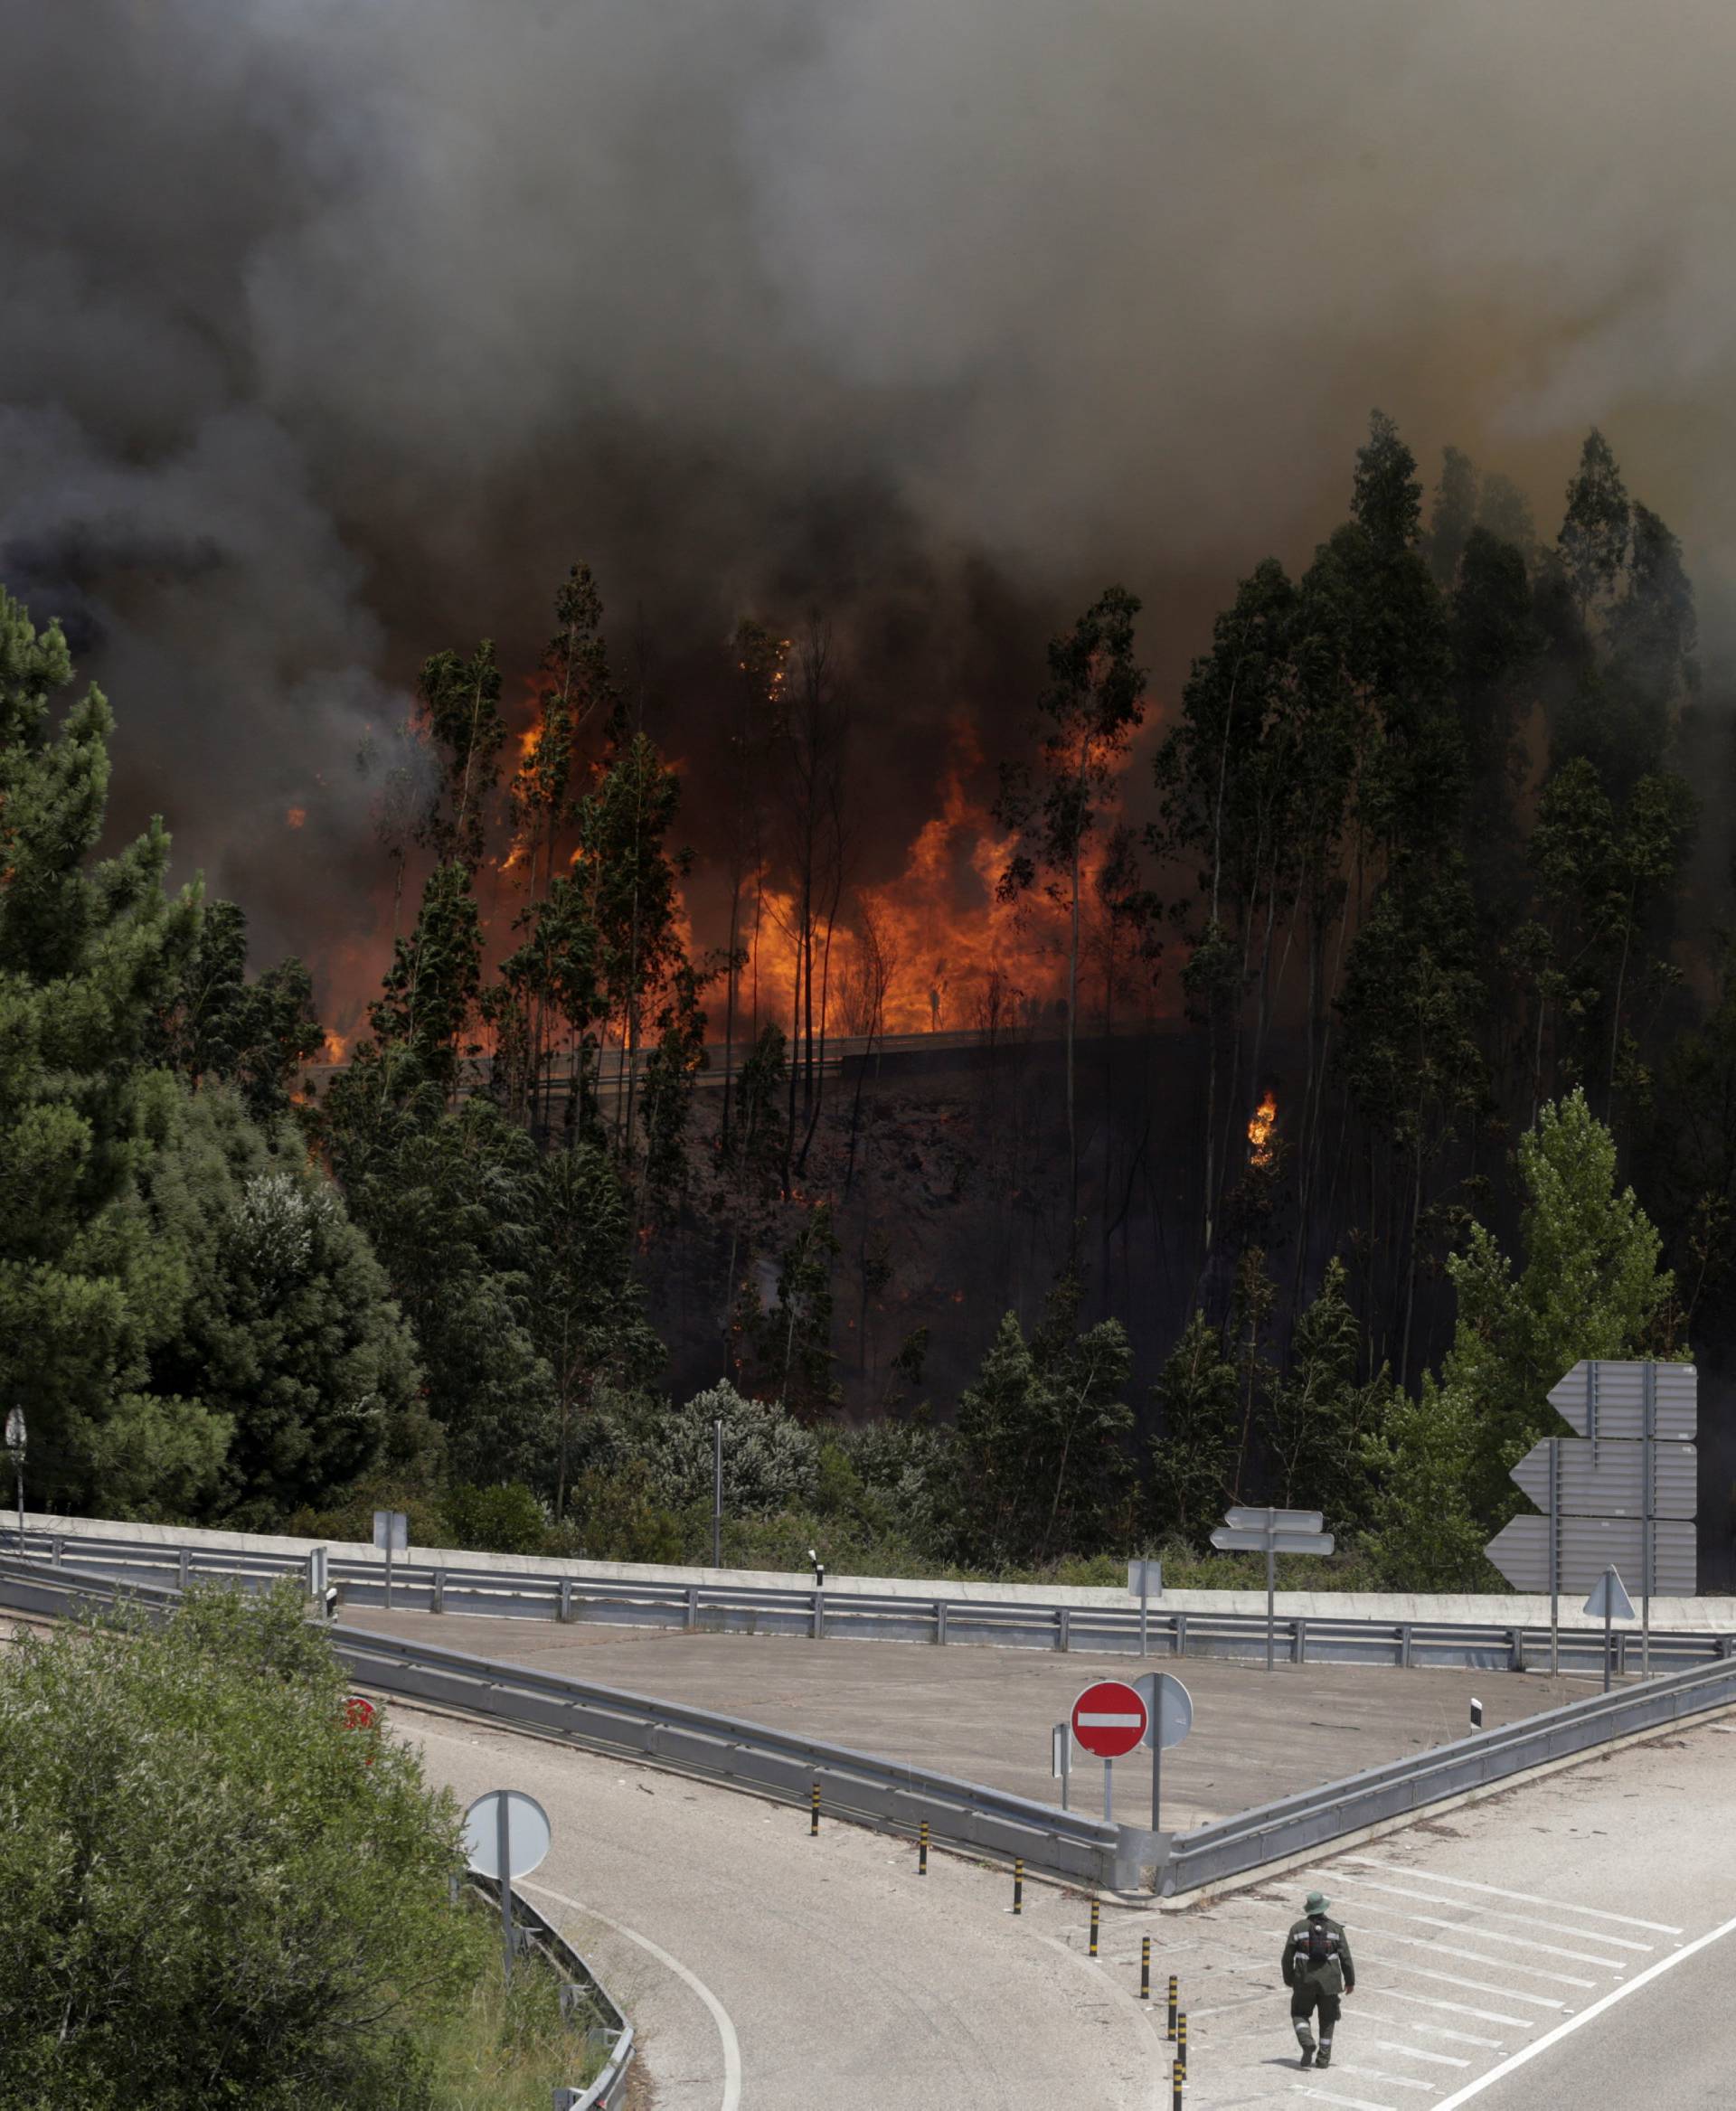 Fire and smoke is seen on the IC8 motorway during a forest fire near Pedrogao Grande